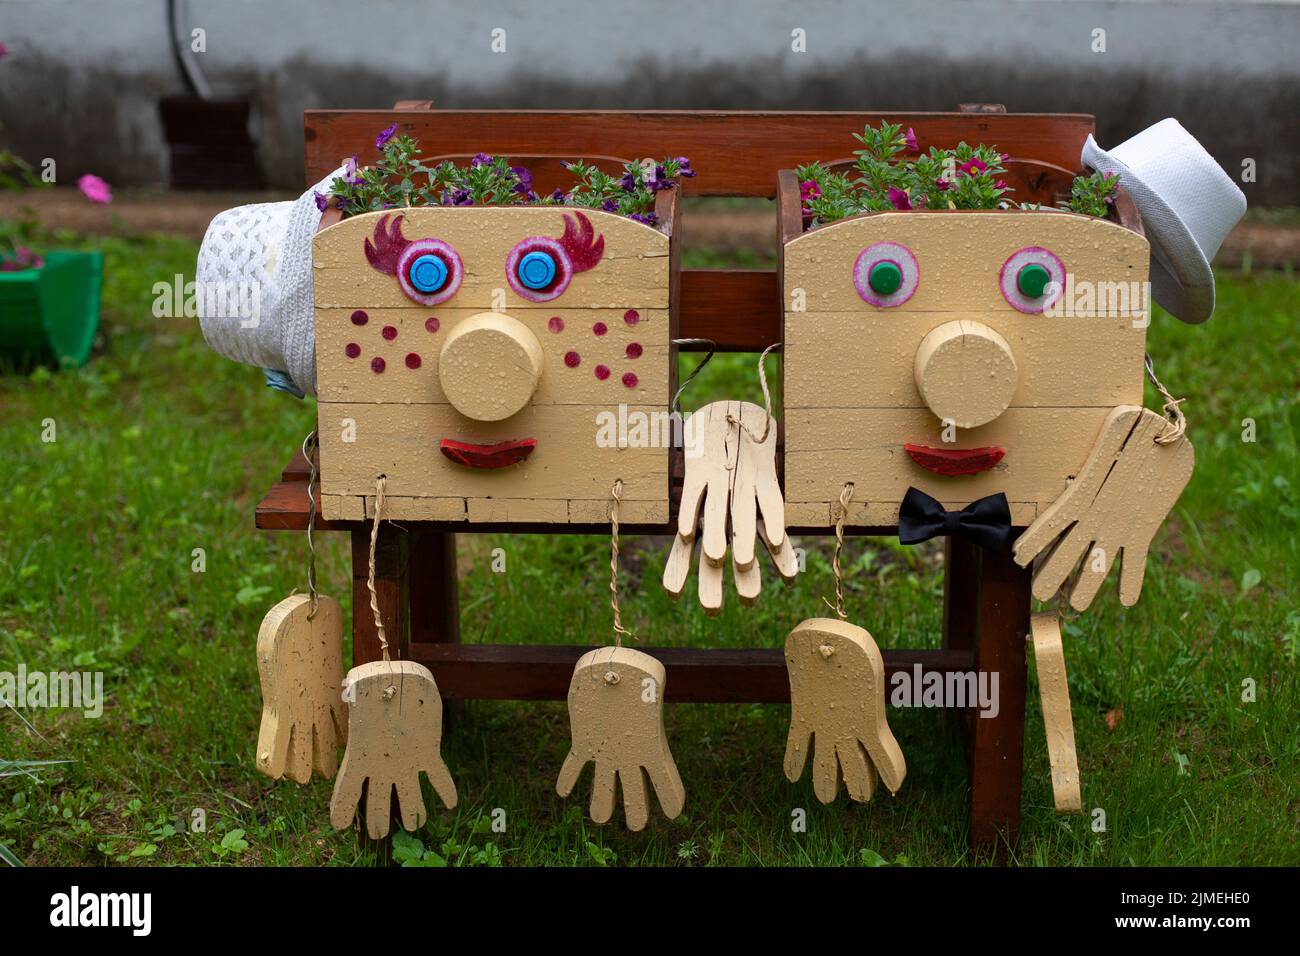 Garden figures. Characters for decorating the flower bed. Stock Photo